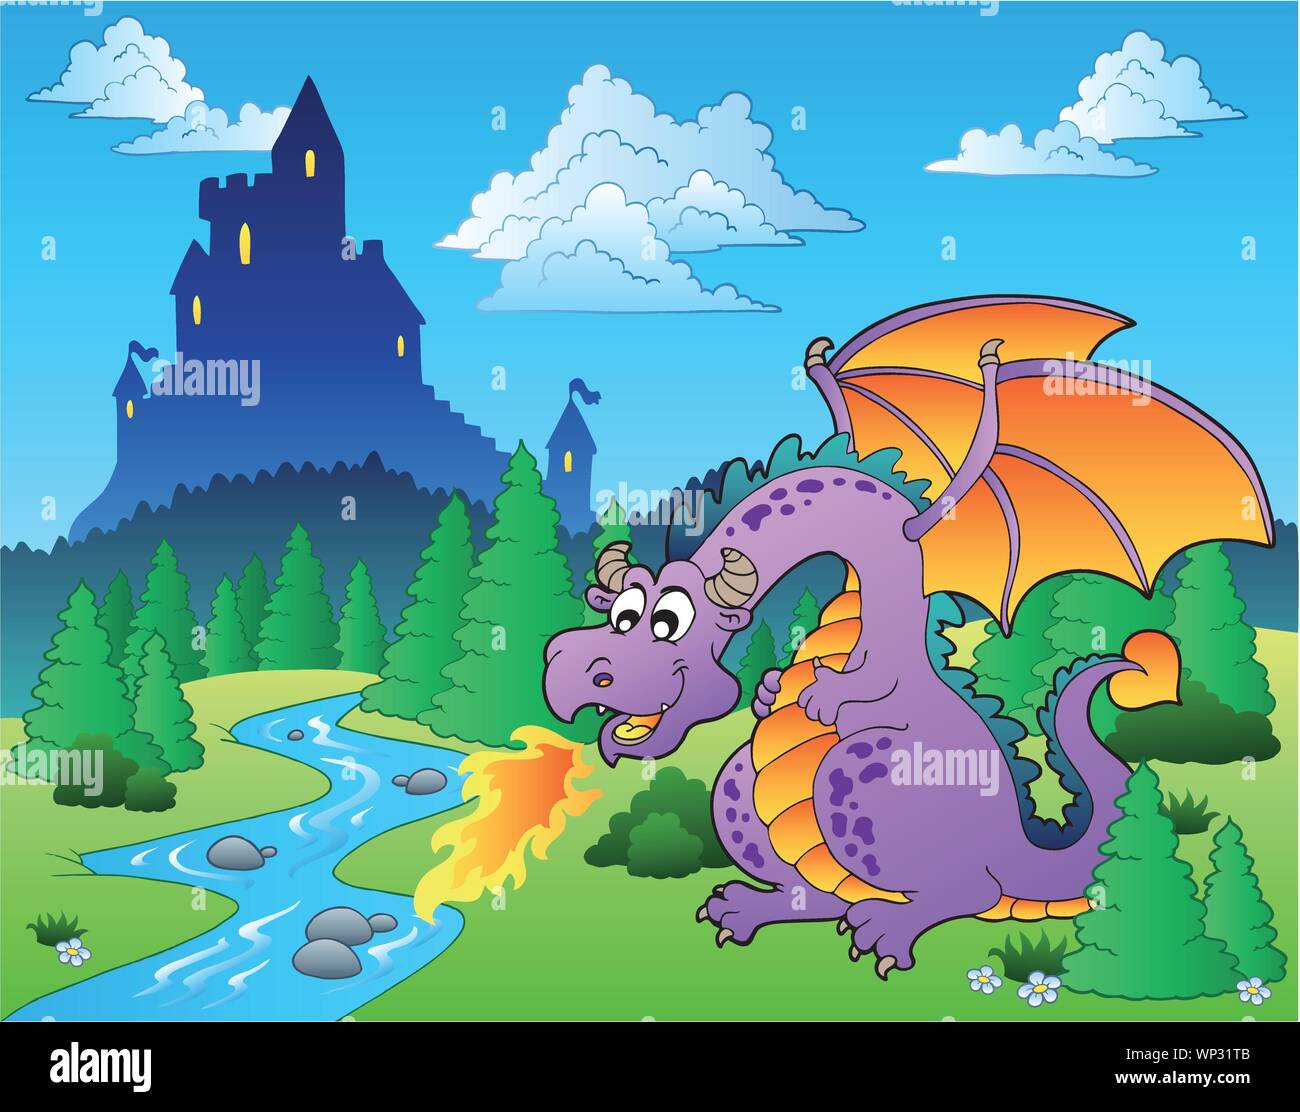 Fairy tale image with dragon 1 Stock Vector